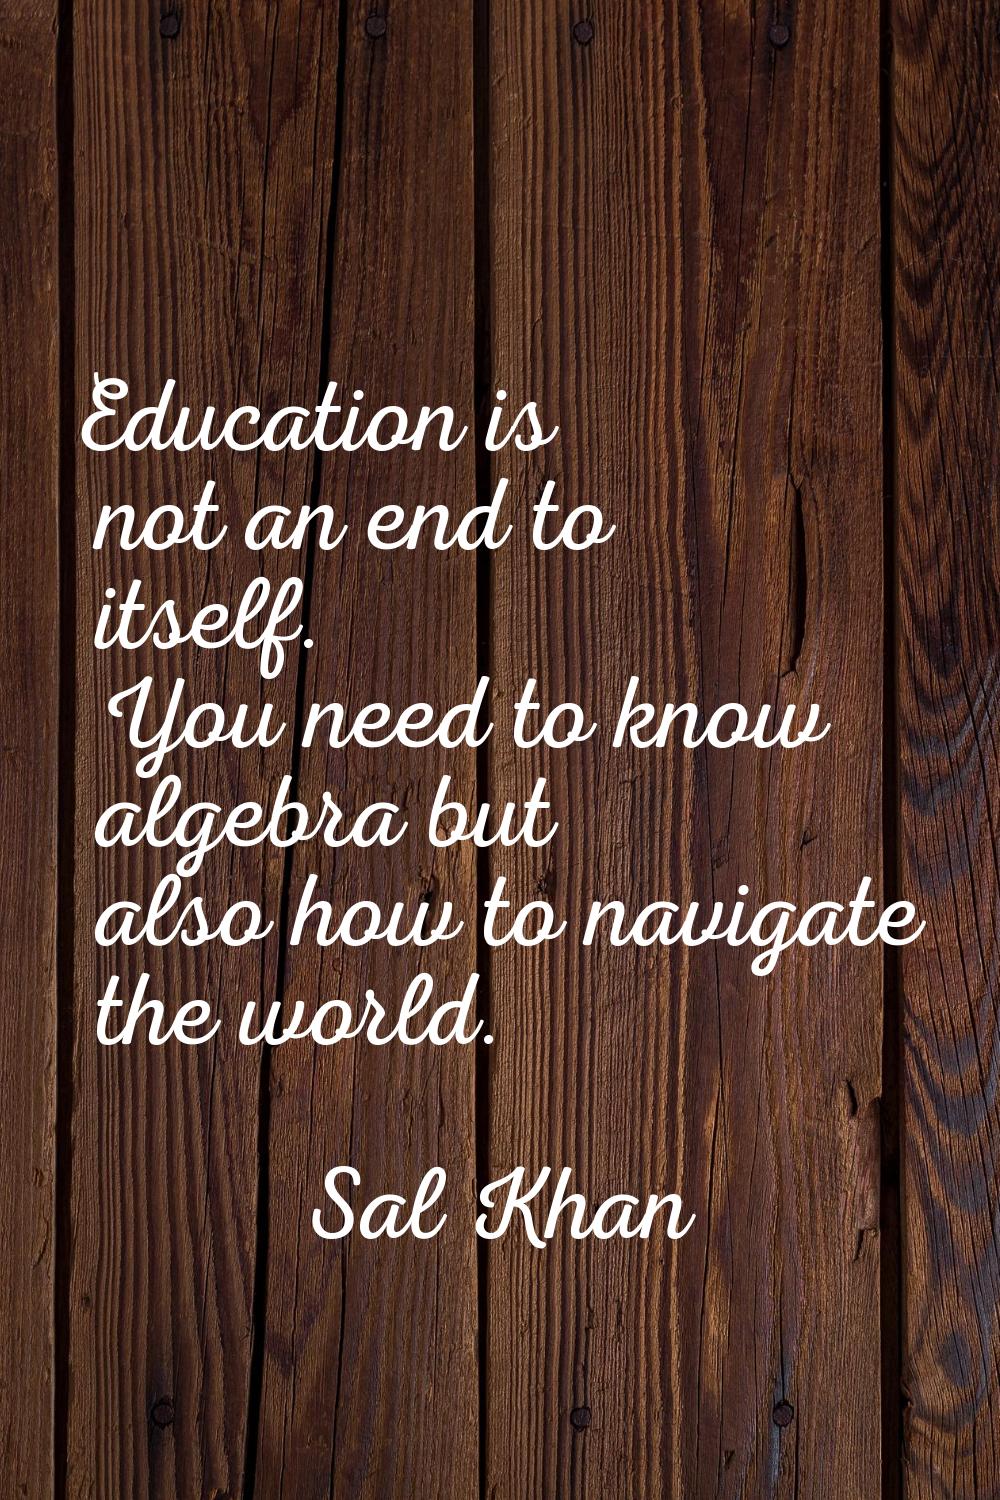 Education is not an end to itself. You need to know algebra but also how to navigate the world.